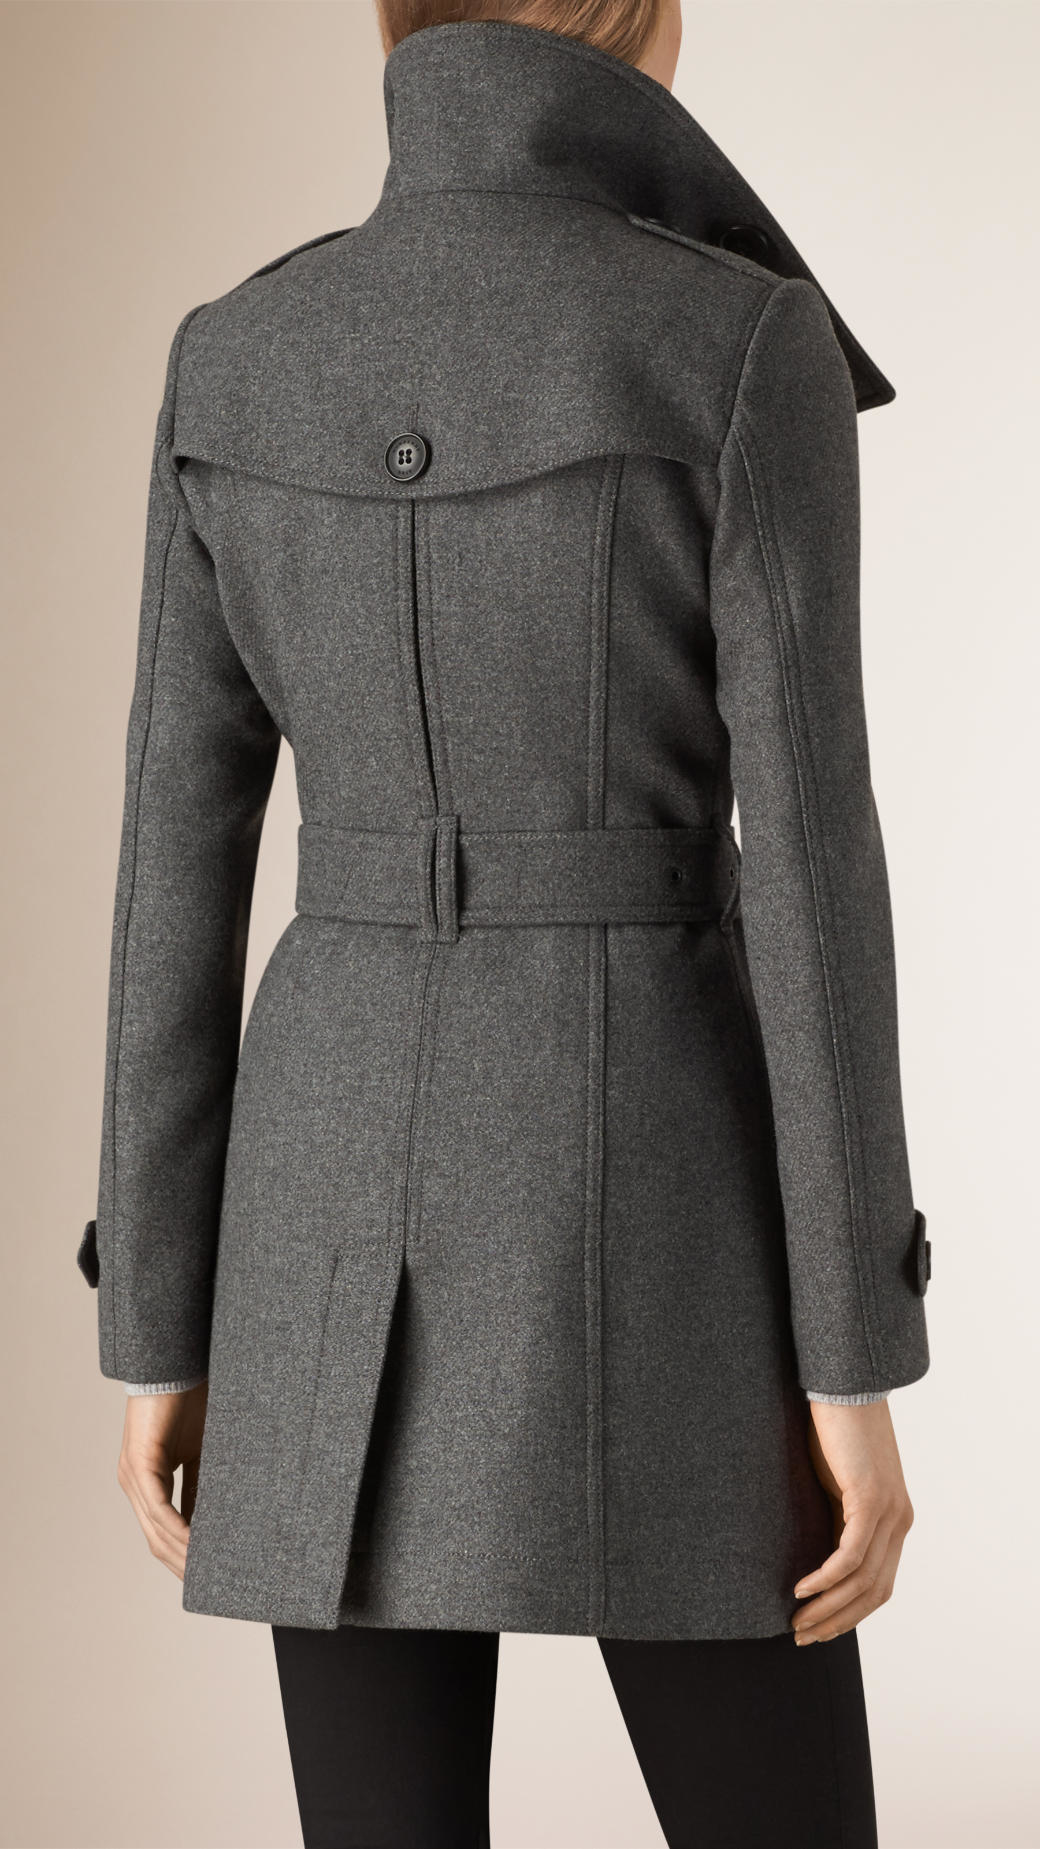 Burberry Wool and Cashmere-Blend Trench Coat in Mid Grey Melange (Gray) -  Lyst